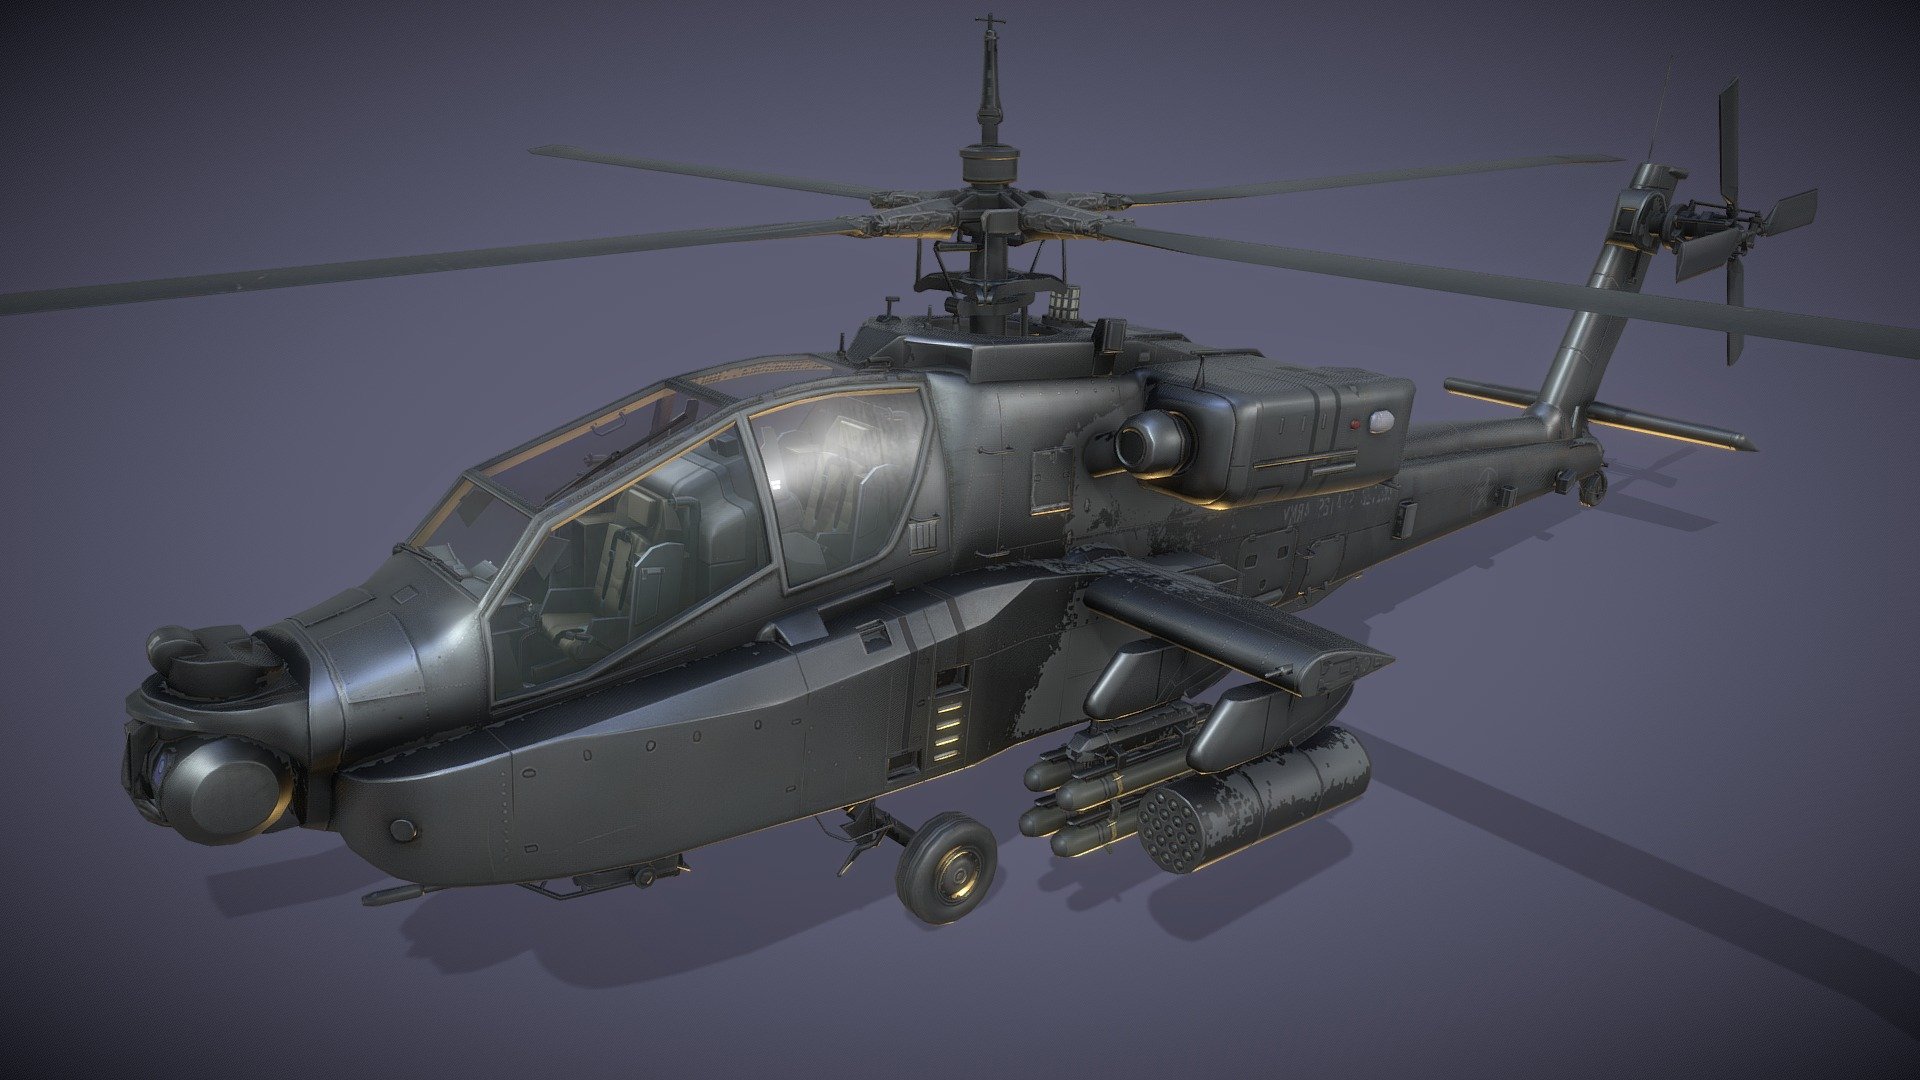 An American twin-turboshaft attack helicopter with a tailwheel-type landing gear arrangement and a tandem cockpit for a crew of two. 




1 mesh.

Geometry: 25210 triangles, 31144 vertices.

Rigged, animations: landing, loop, takeoff.

PBR high resolution textures (4K).

Channels: diffuse, normal, metallic, emission.

SRP support: BuiltIn, URP, HDRP.

Unity version: +2020.3.
 - AH-64 Apache (USA Attack Helicopter) - Buy Royalty Free 3D model by Hitoshi Matsui (@hitoshi.matsui) 3d model